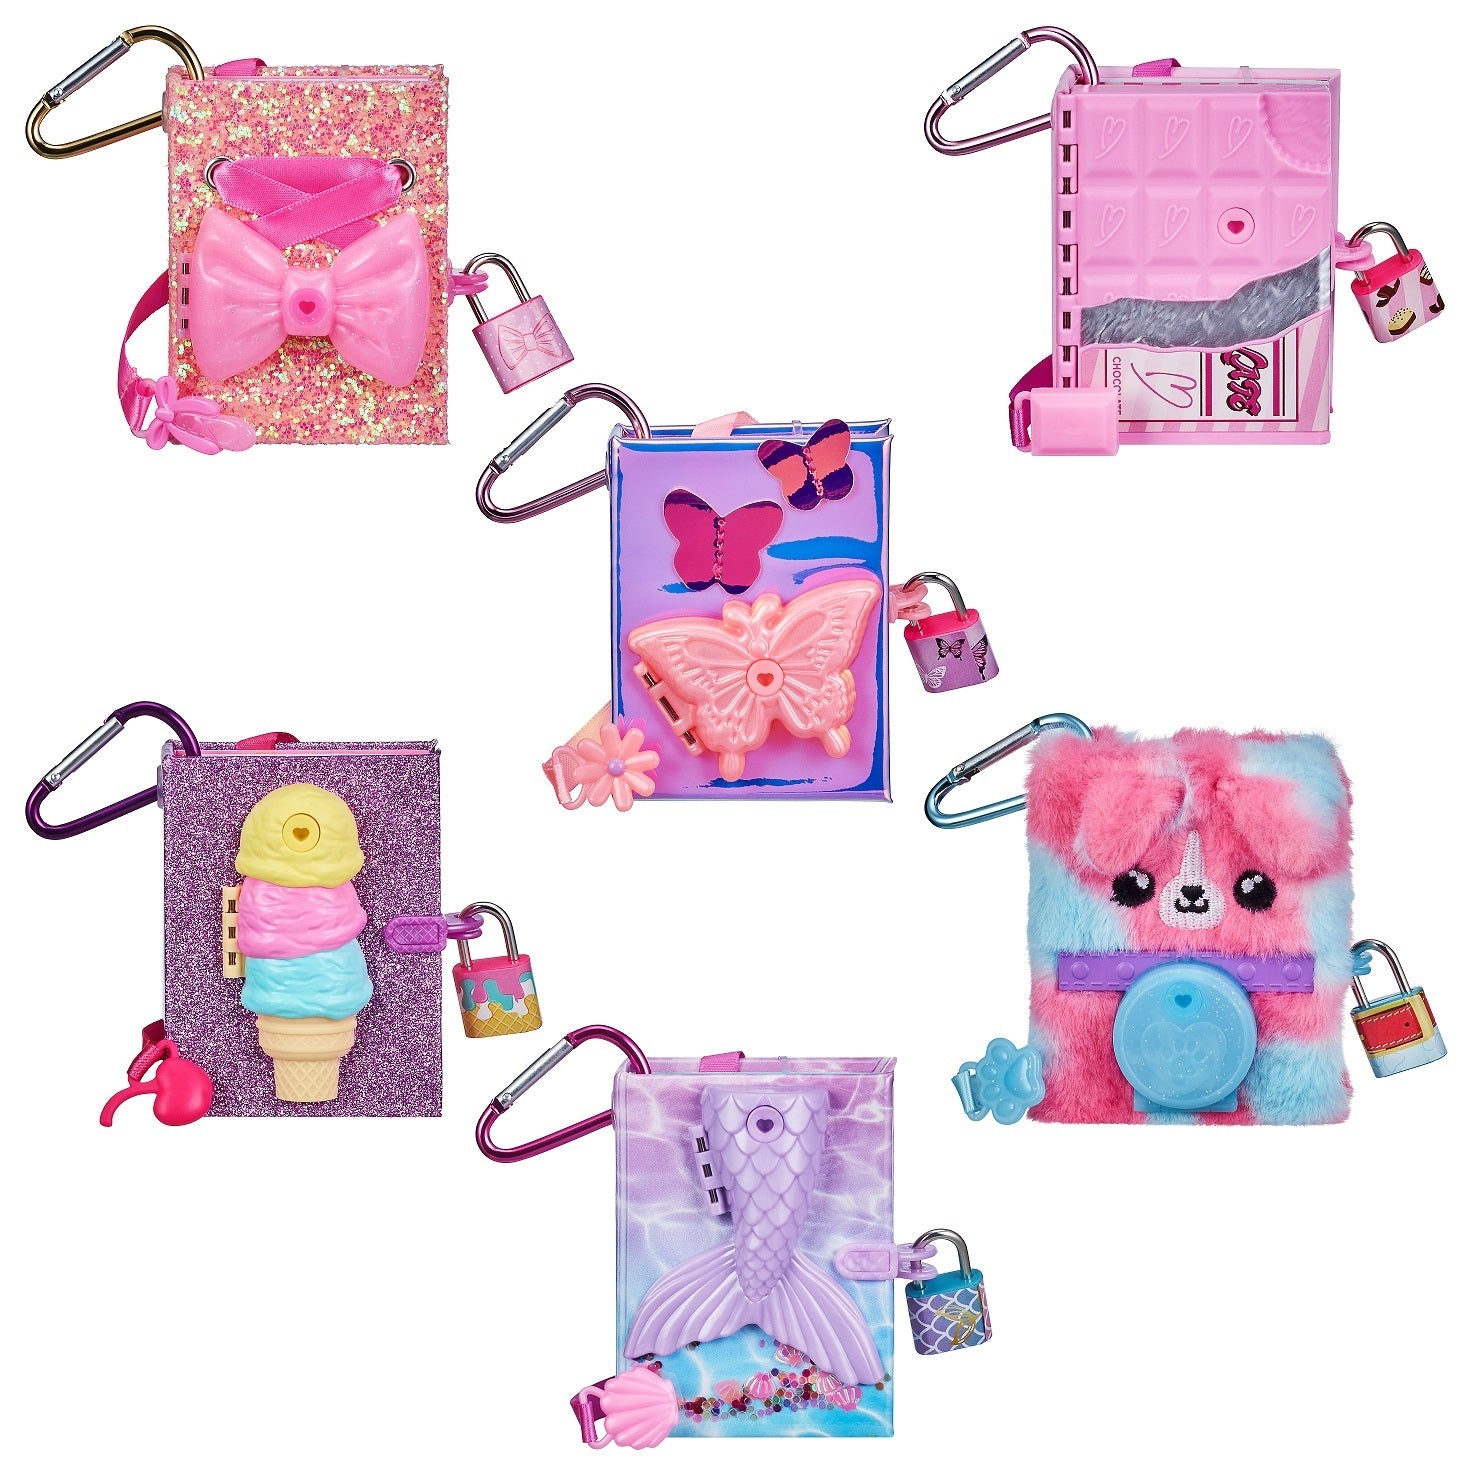 Real Littles Disney Handbags and Backpack: Lilo & Stitch, Cinderella,  Monsters Inc. 